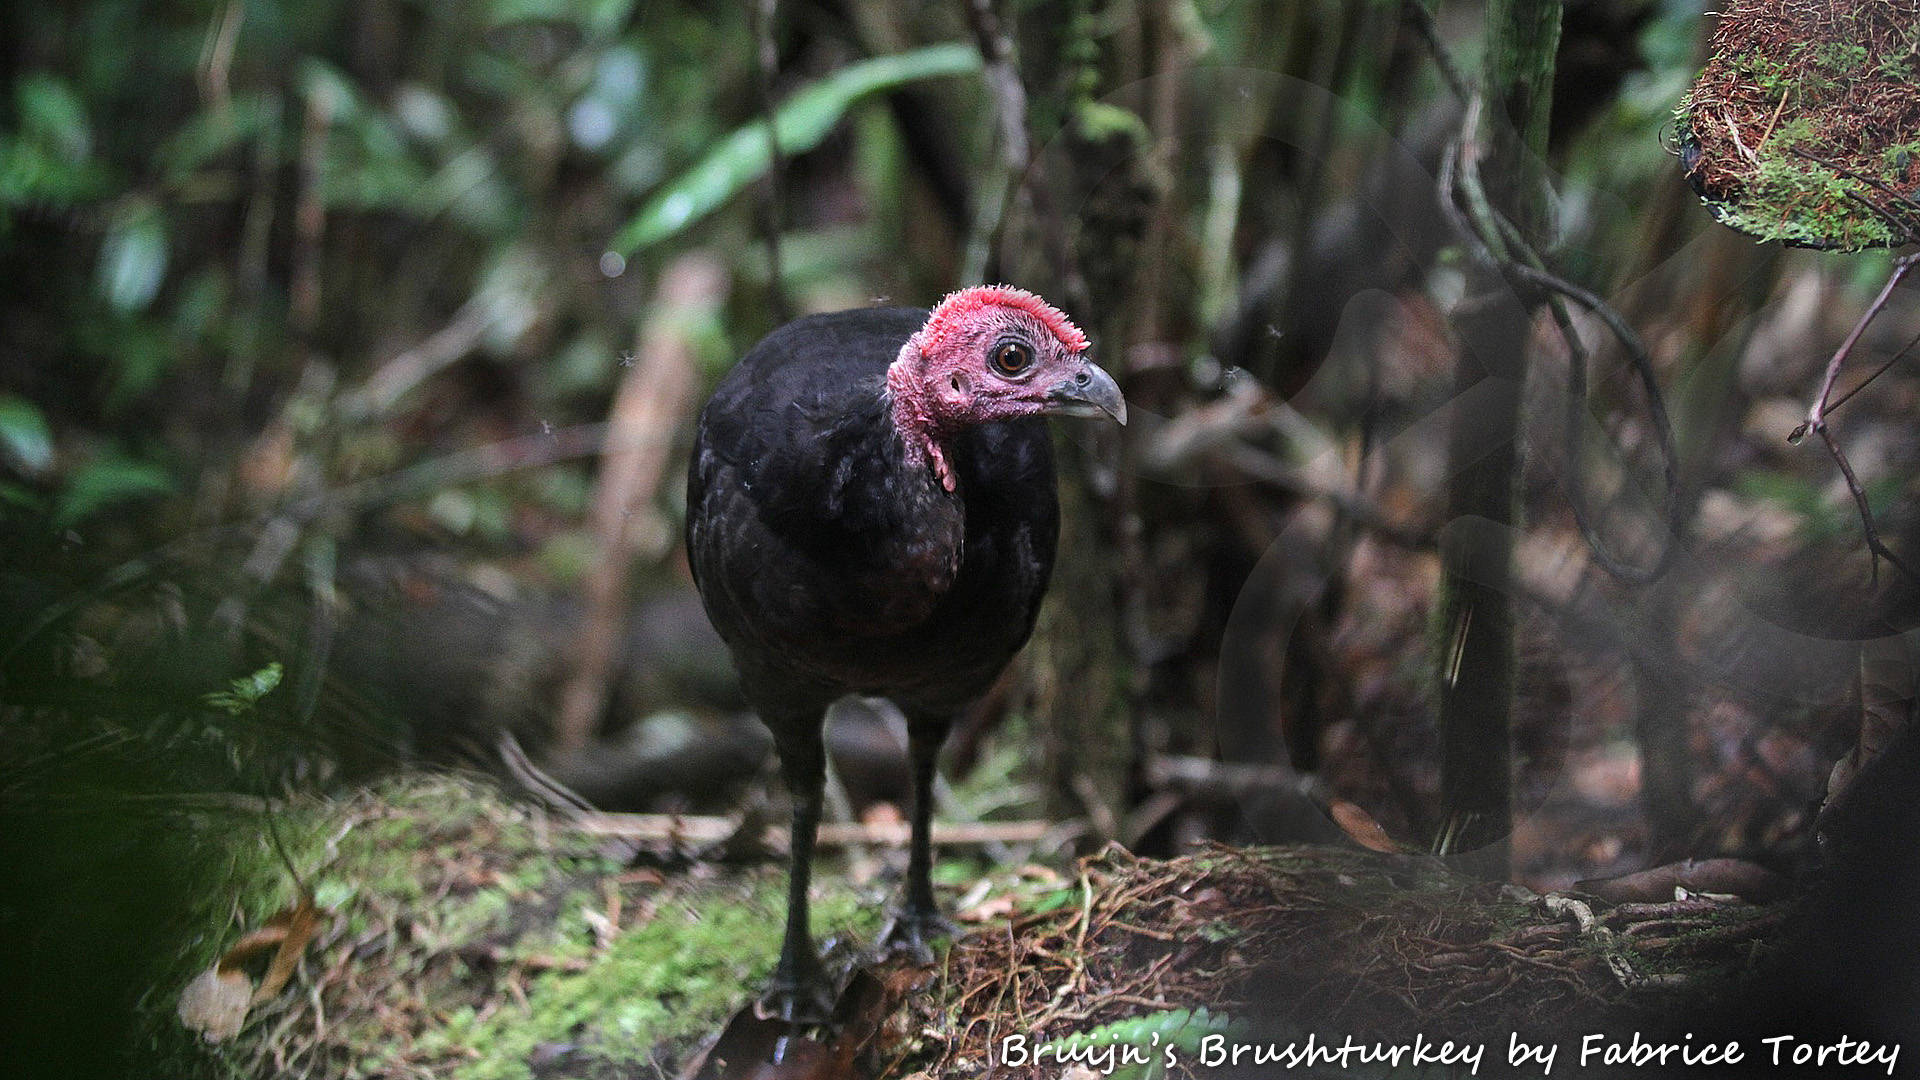 Bruijn's Brushturkey Aepypodius bruijnii is among 66 bird species that occur only in West Papua and nowhere else on Earth. It appears to be entirely confined to the largest Raja Ampat island of Waigeo. Copyright © Fabrice Tortey